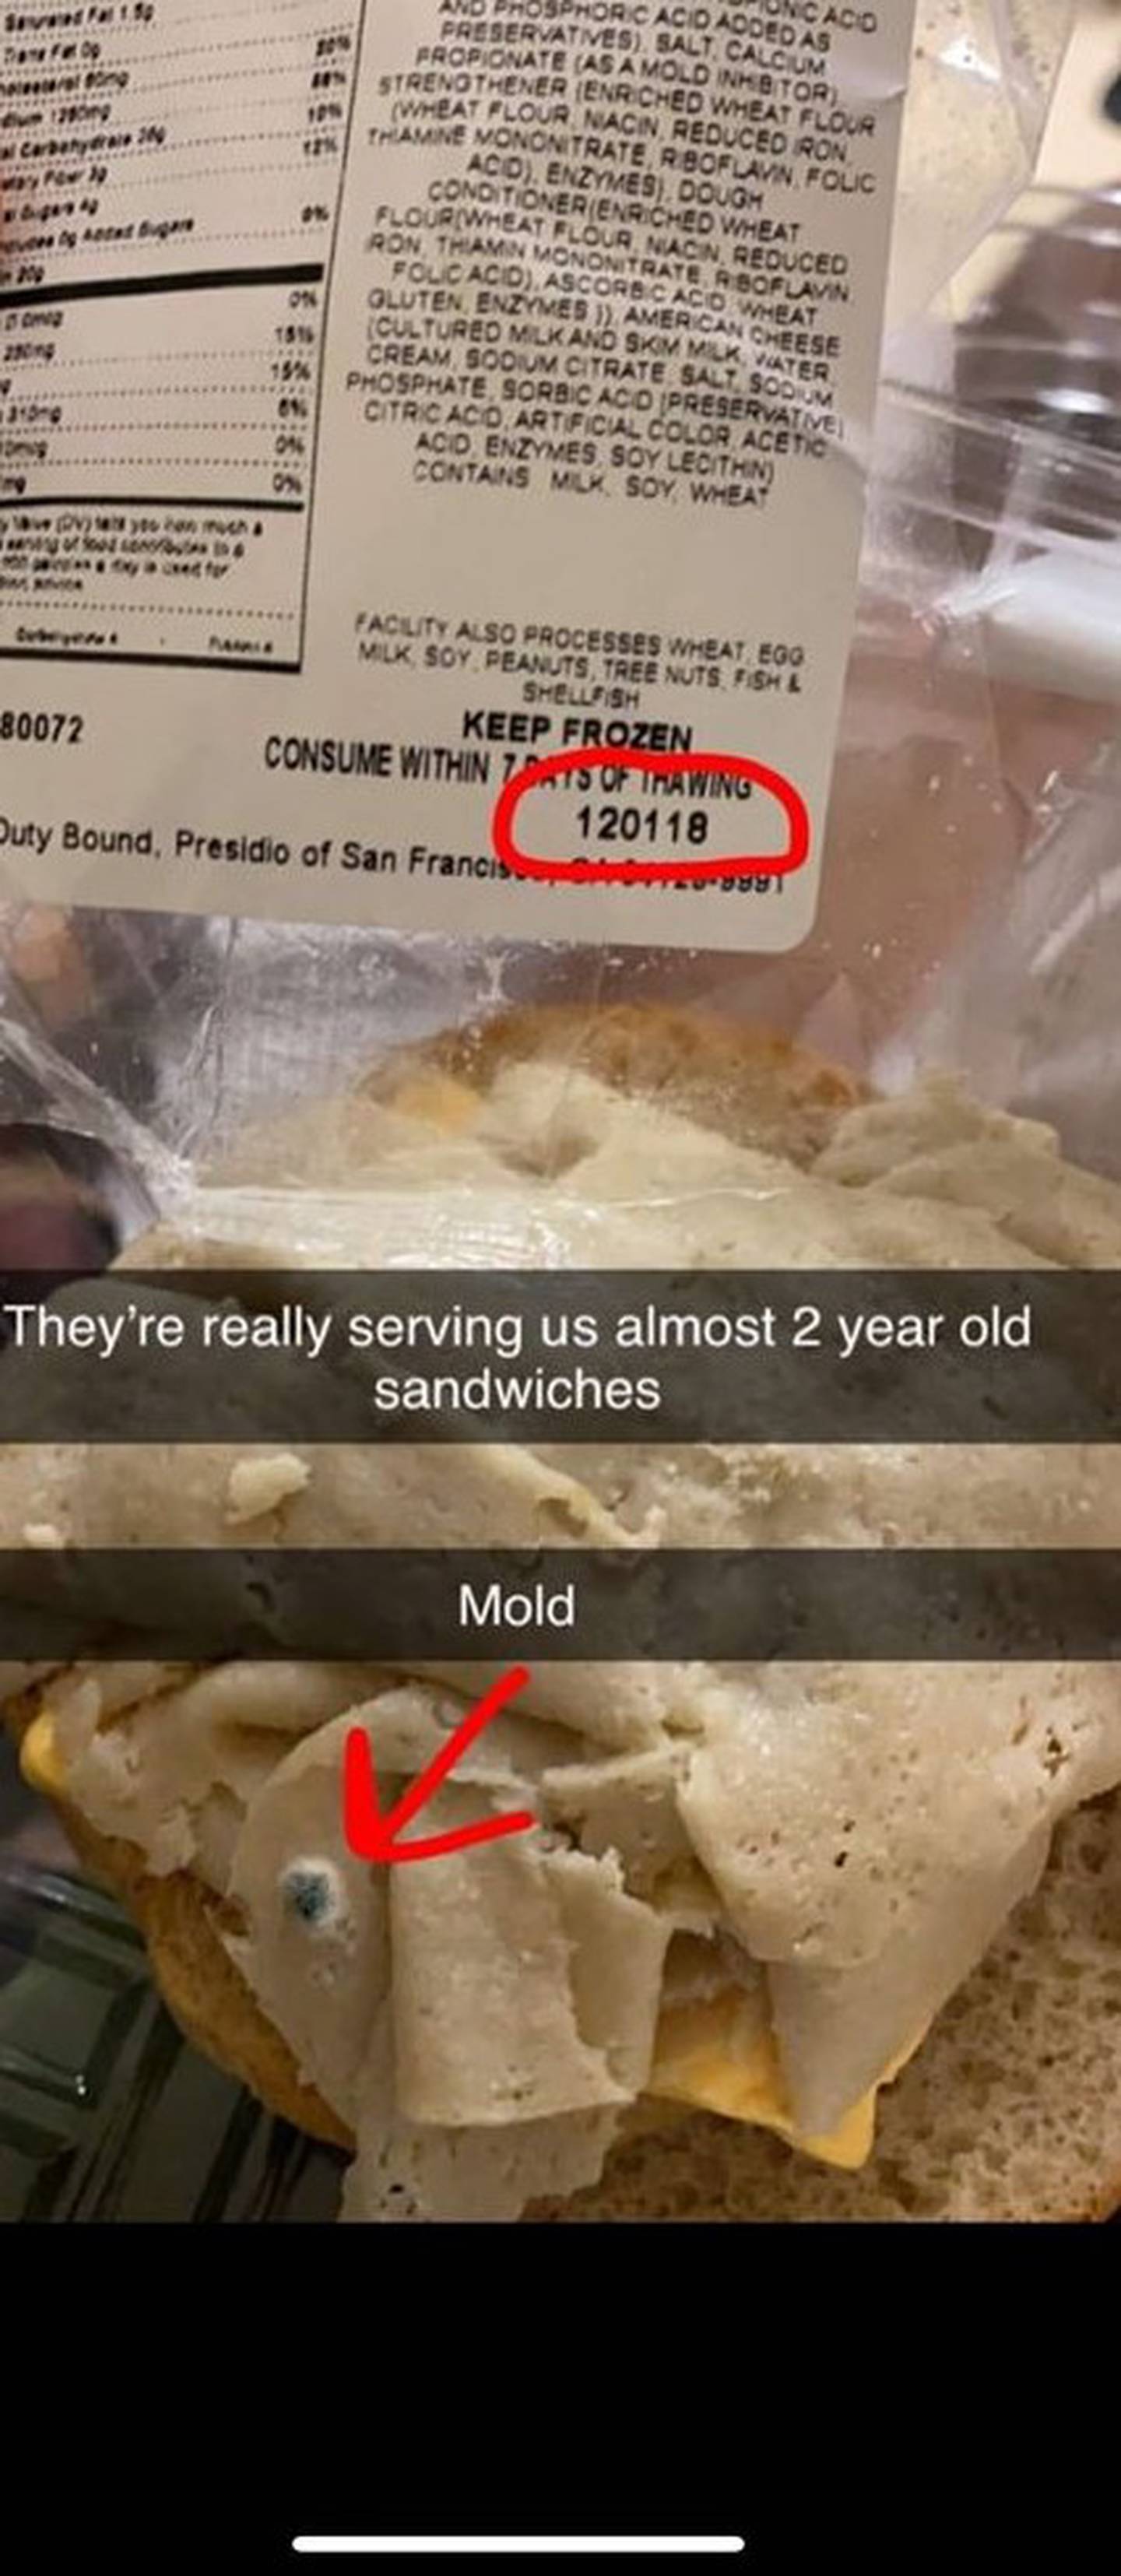 Eat around the mold: Marines in Japan served expired food while on COVID-19  quarantine